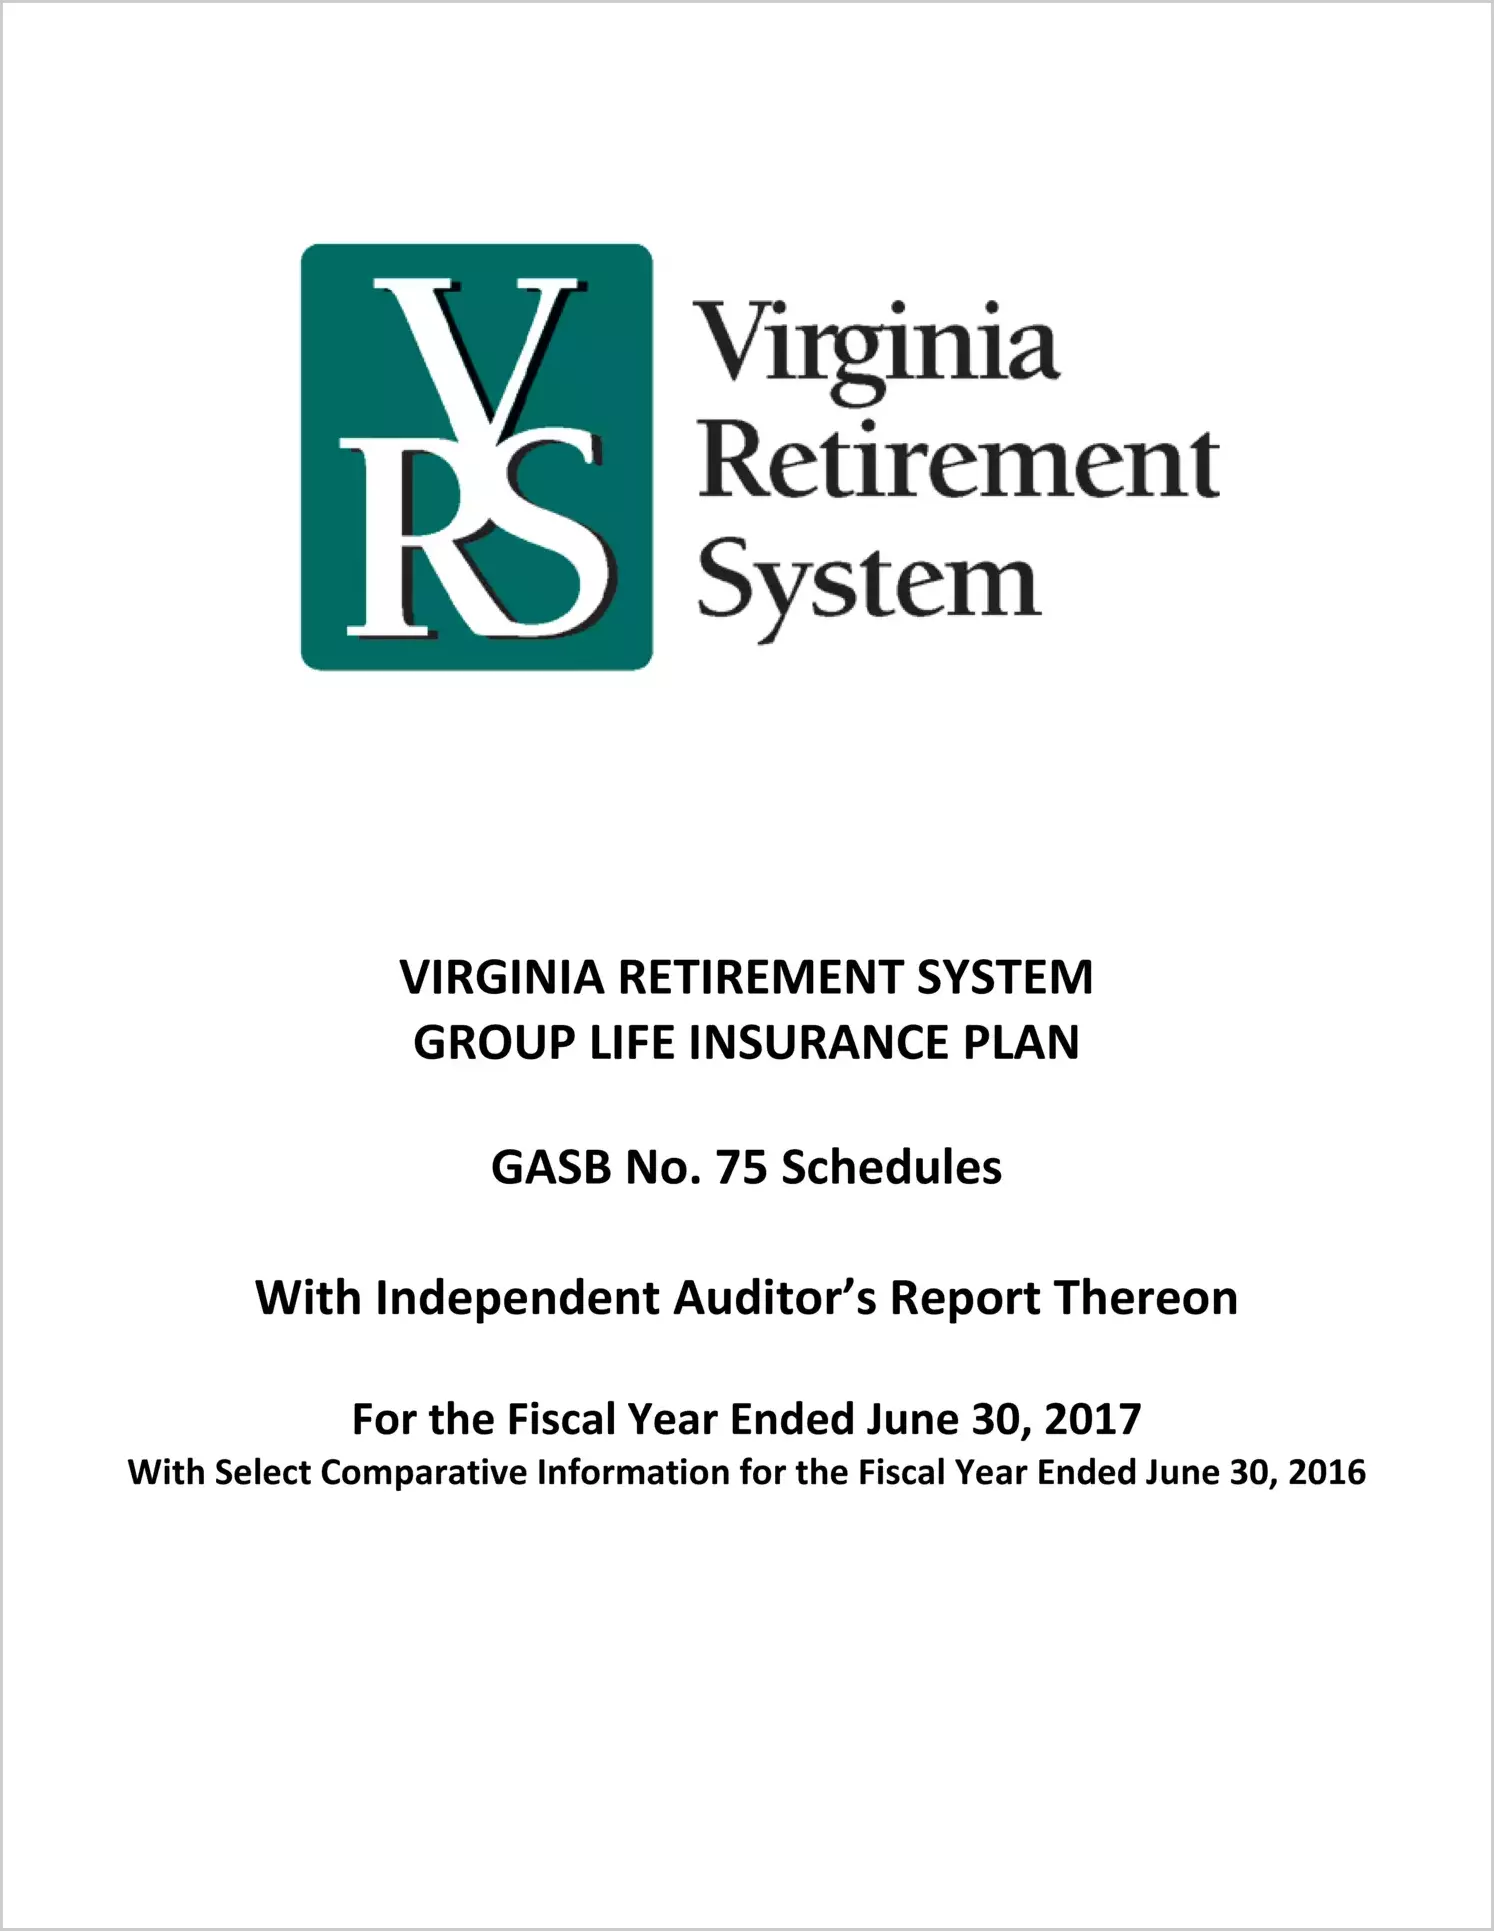 GASB 75 Schedule - Group Life Insurance Plan OPEB for the year ended June 30, 2017